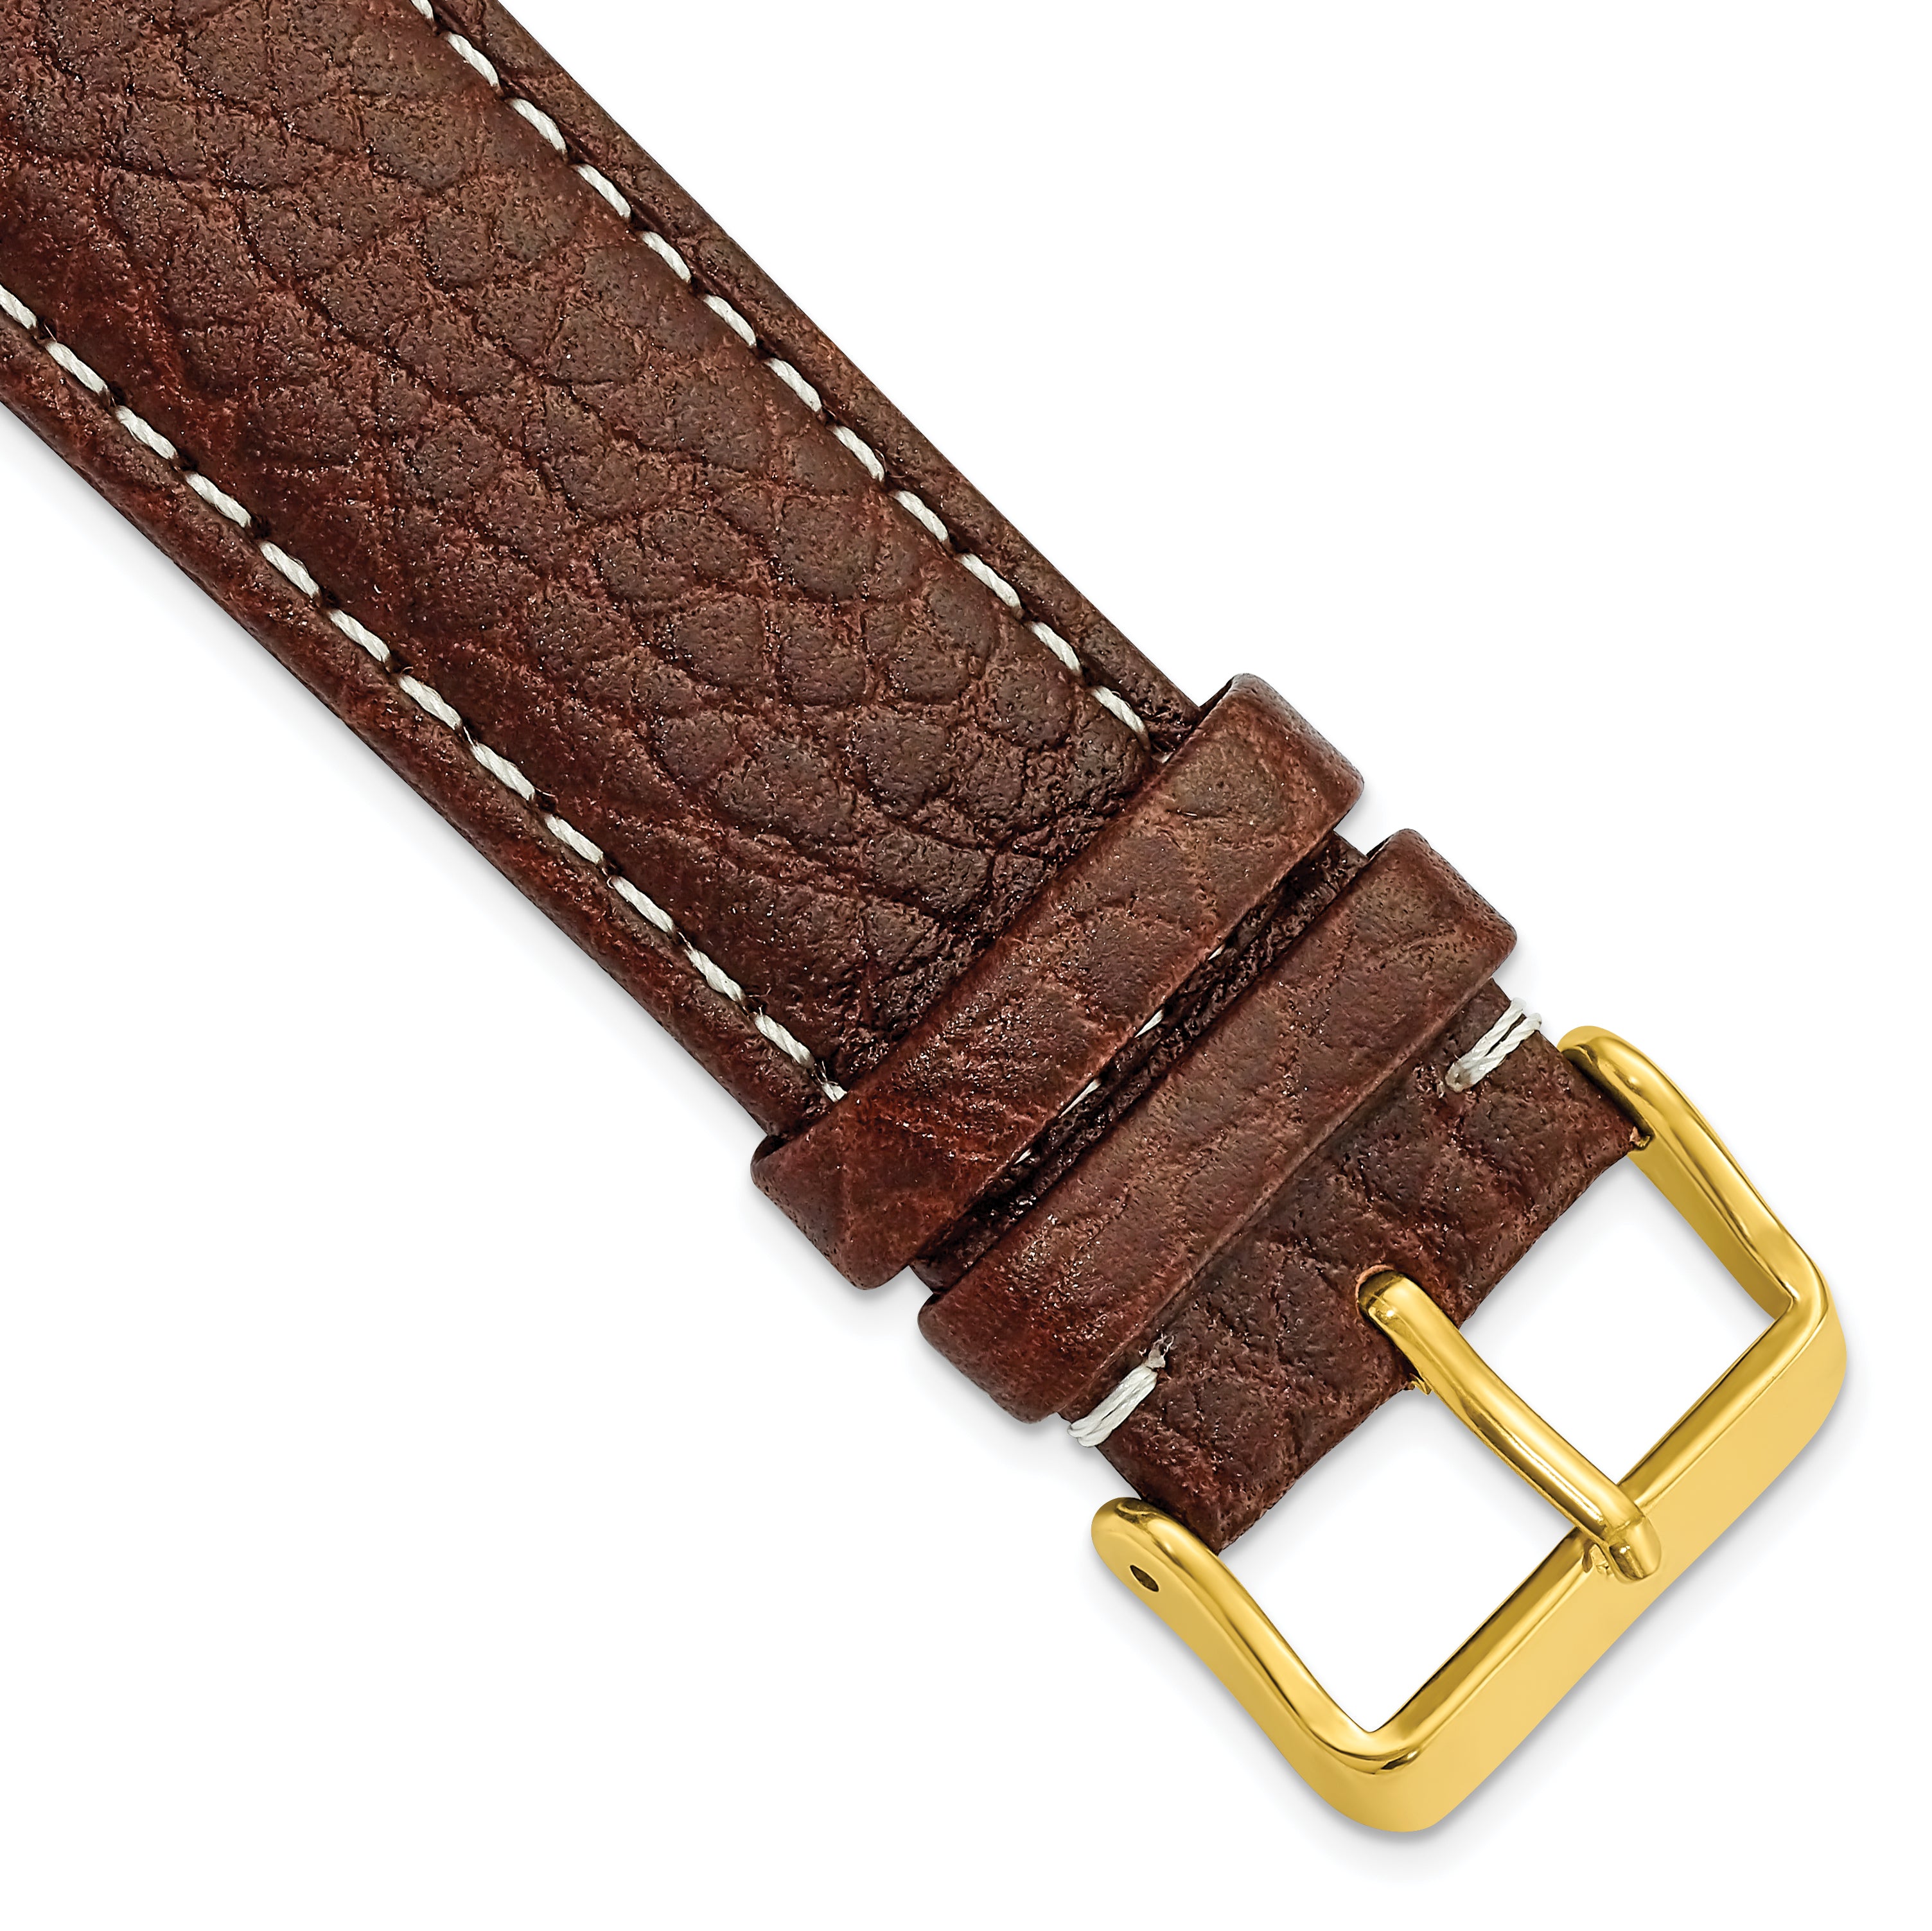 DeBeer 24mm Dark Brown Sport Leather with White Stitching and Gold-tone Buckle 7.5 inch Watch Band